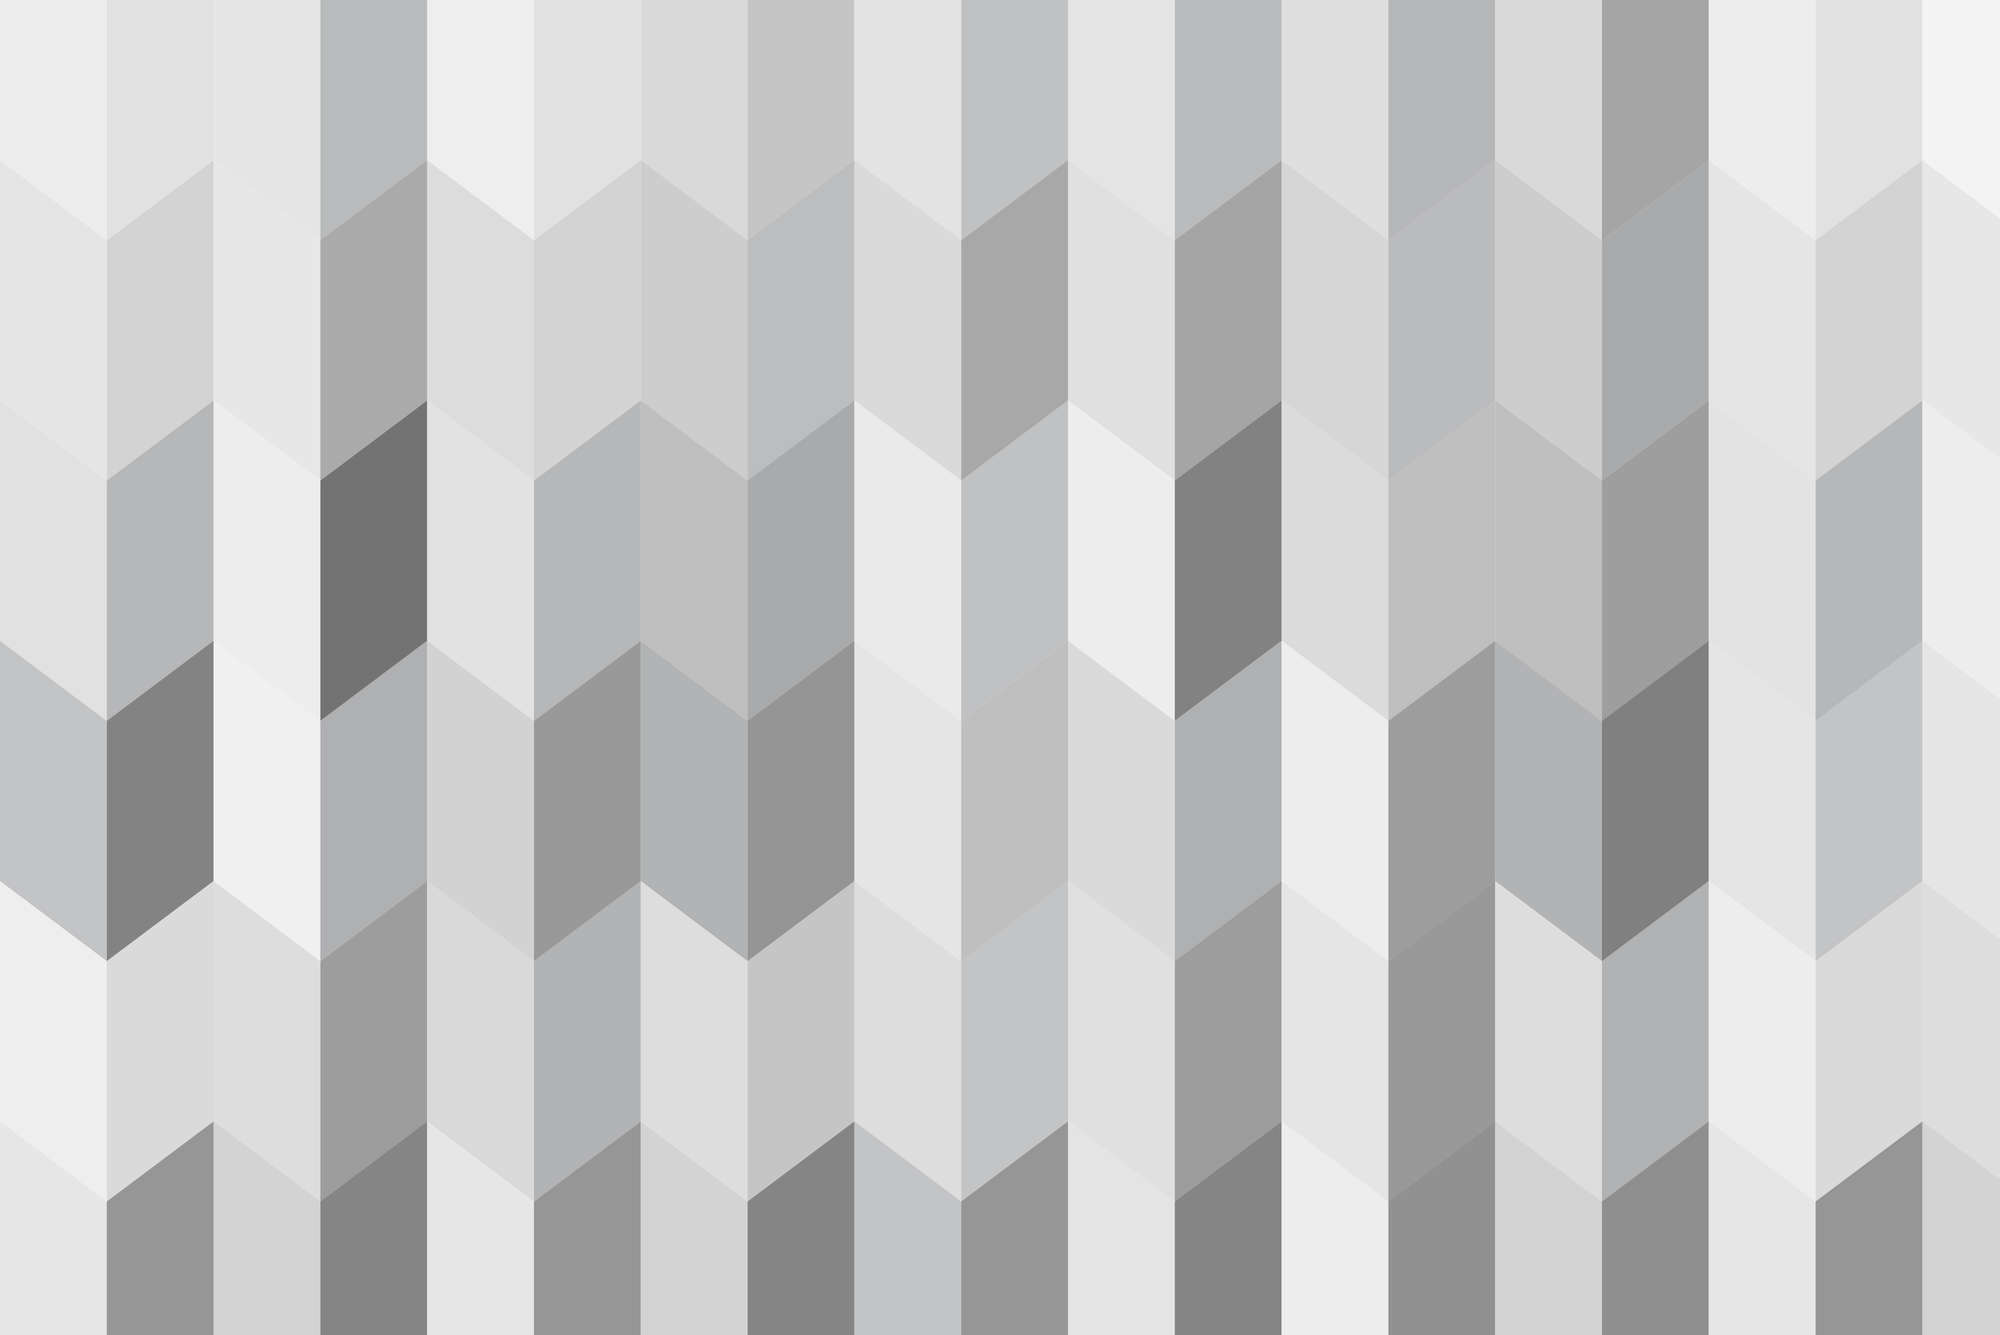             Design wall mural fanned motif grey on textured non-woven
        